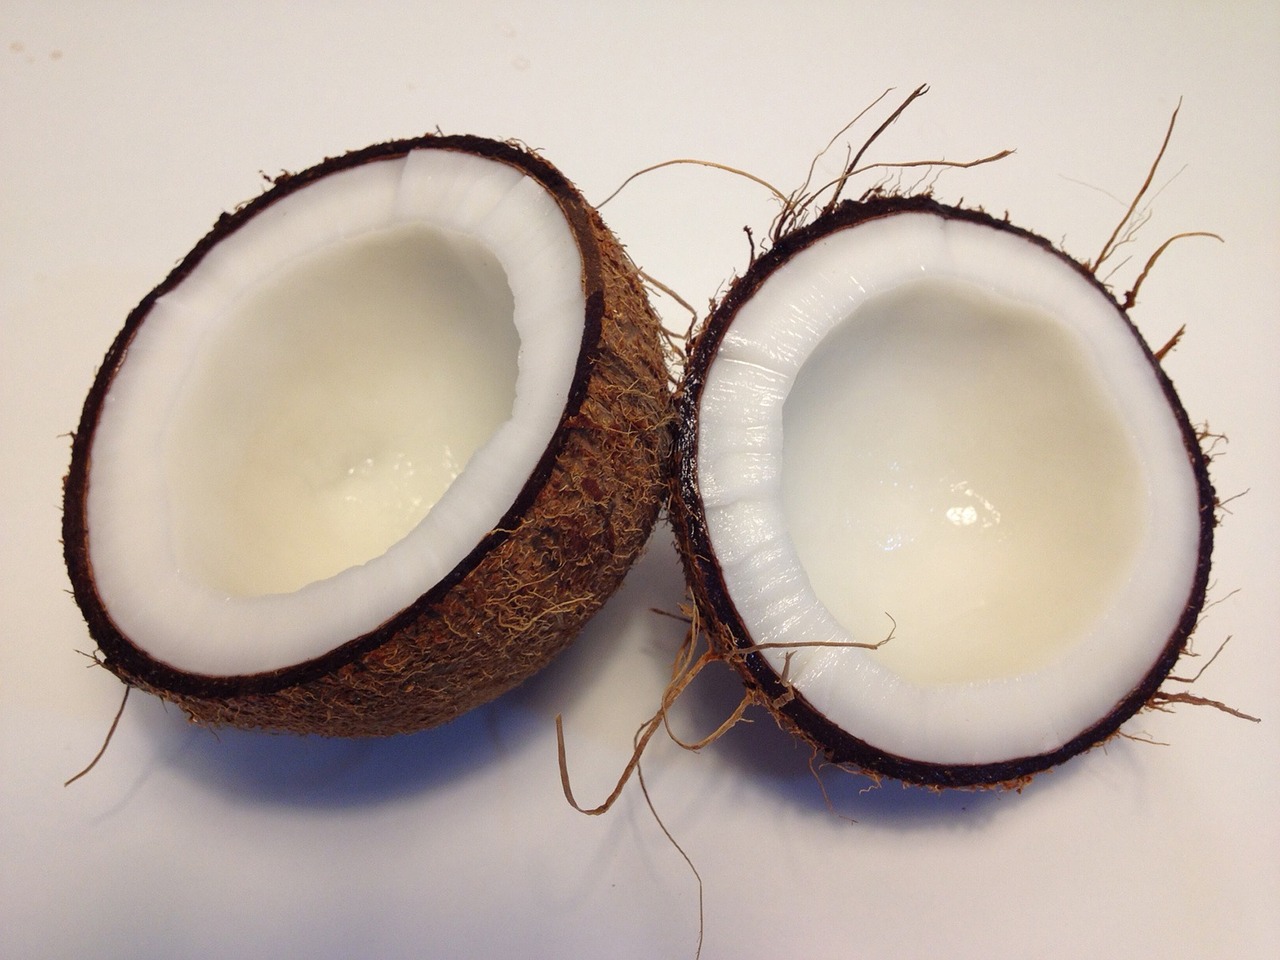 grated coconut recall